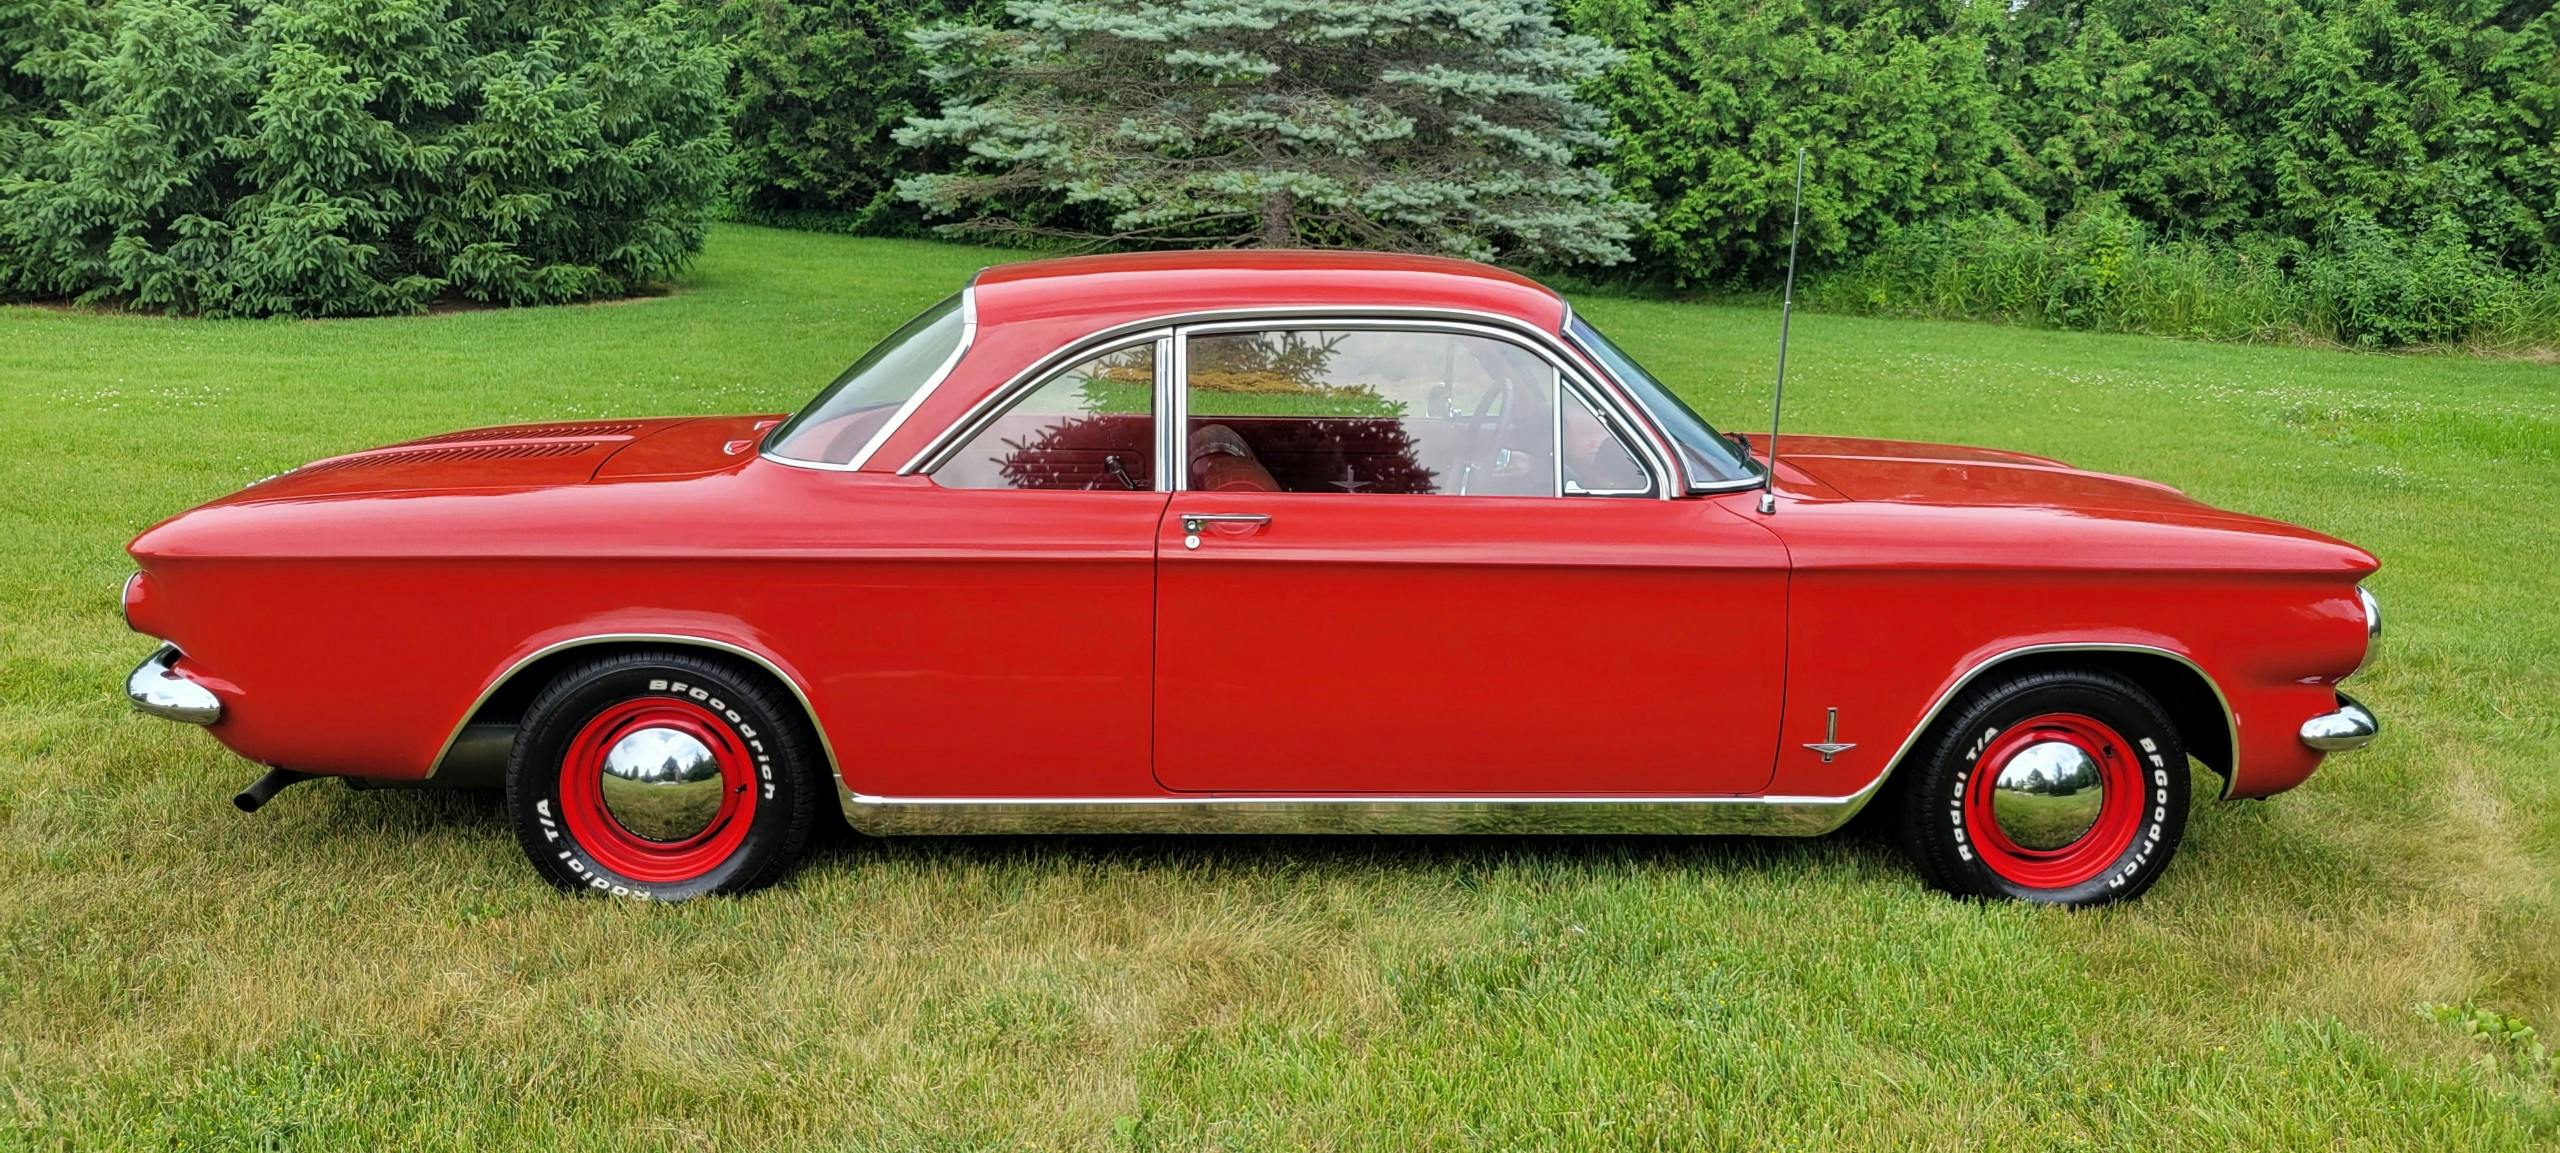 1964 Chevrolet Corvair Monza 900 side